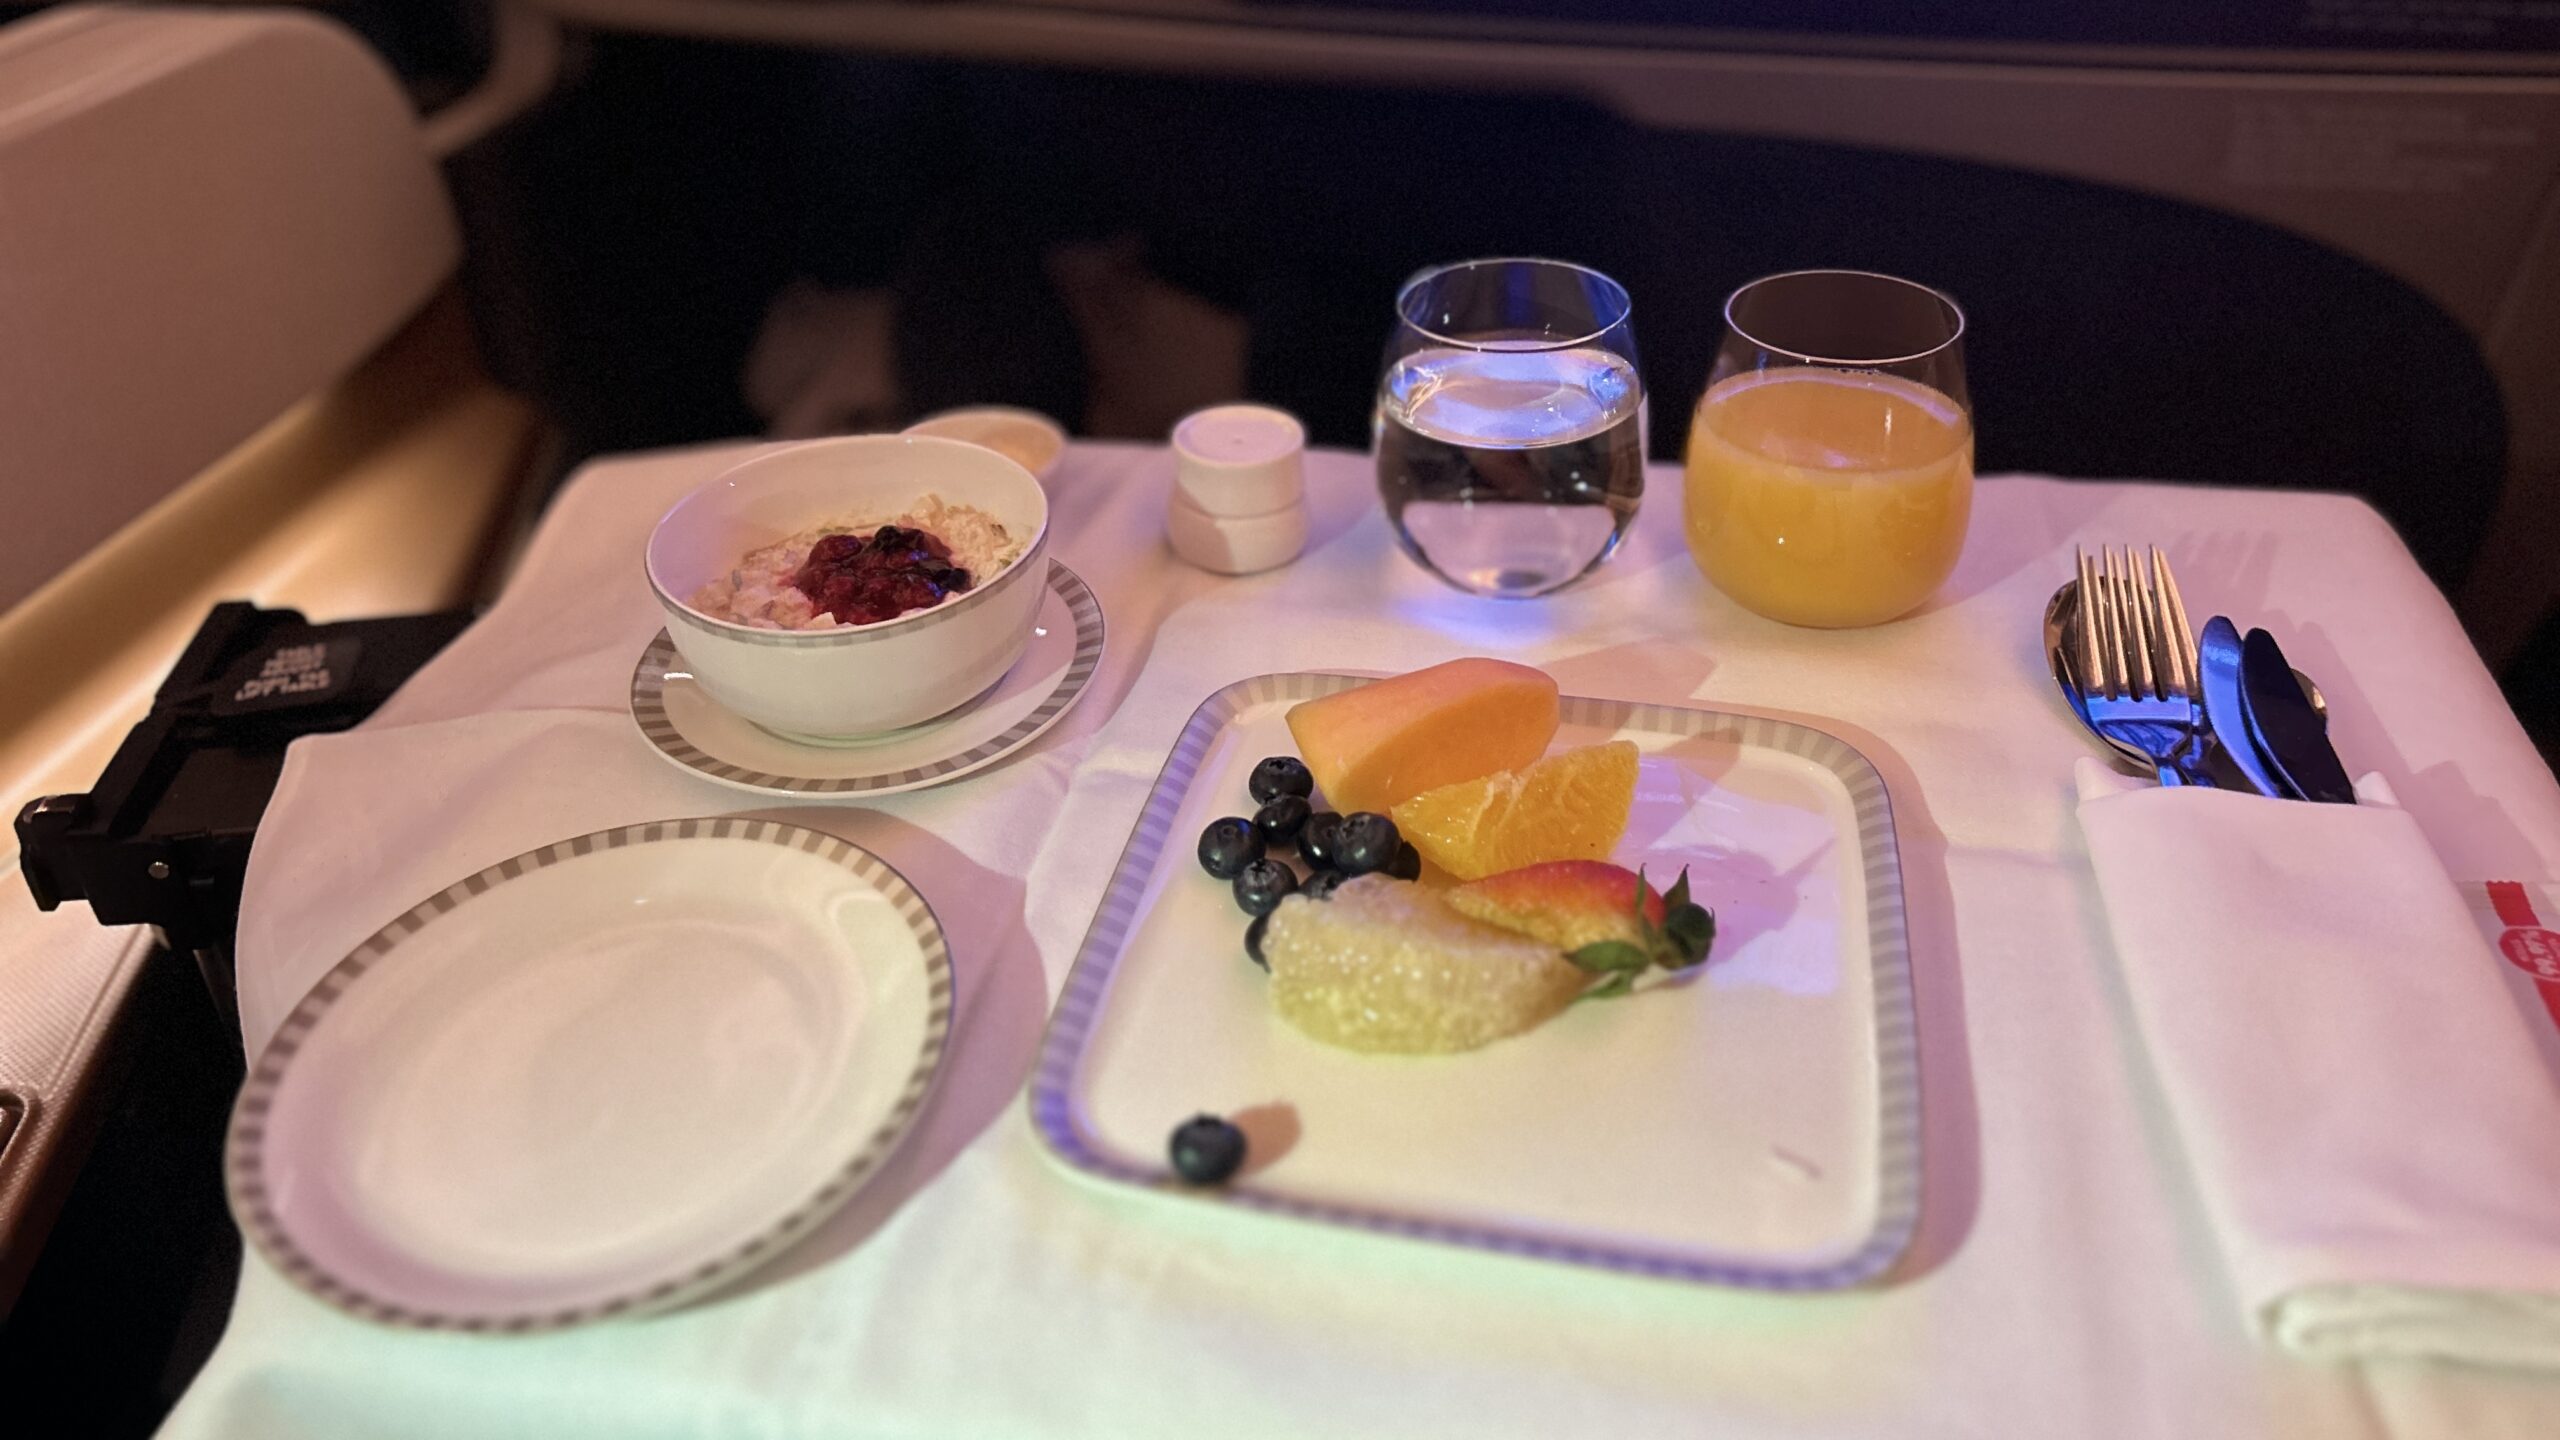 Singapore Airlines A350 Business Class Singapore to Brussels Fruit Plate Point Hacks by Daniel Sciberras